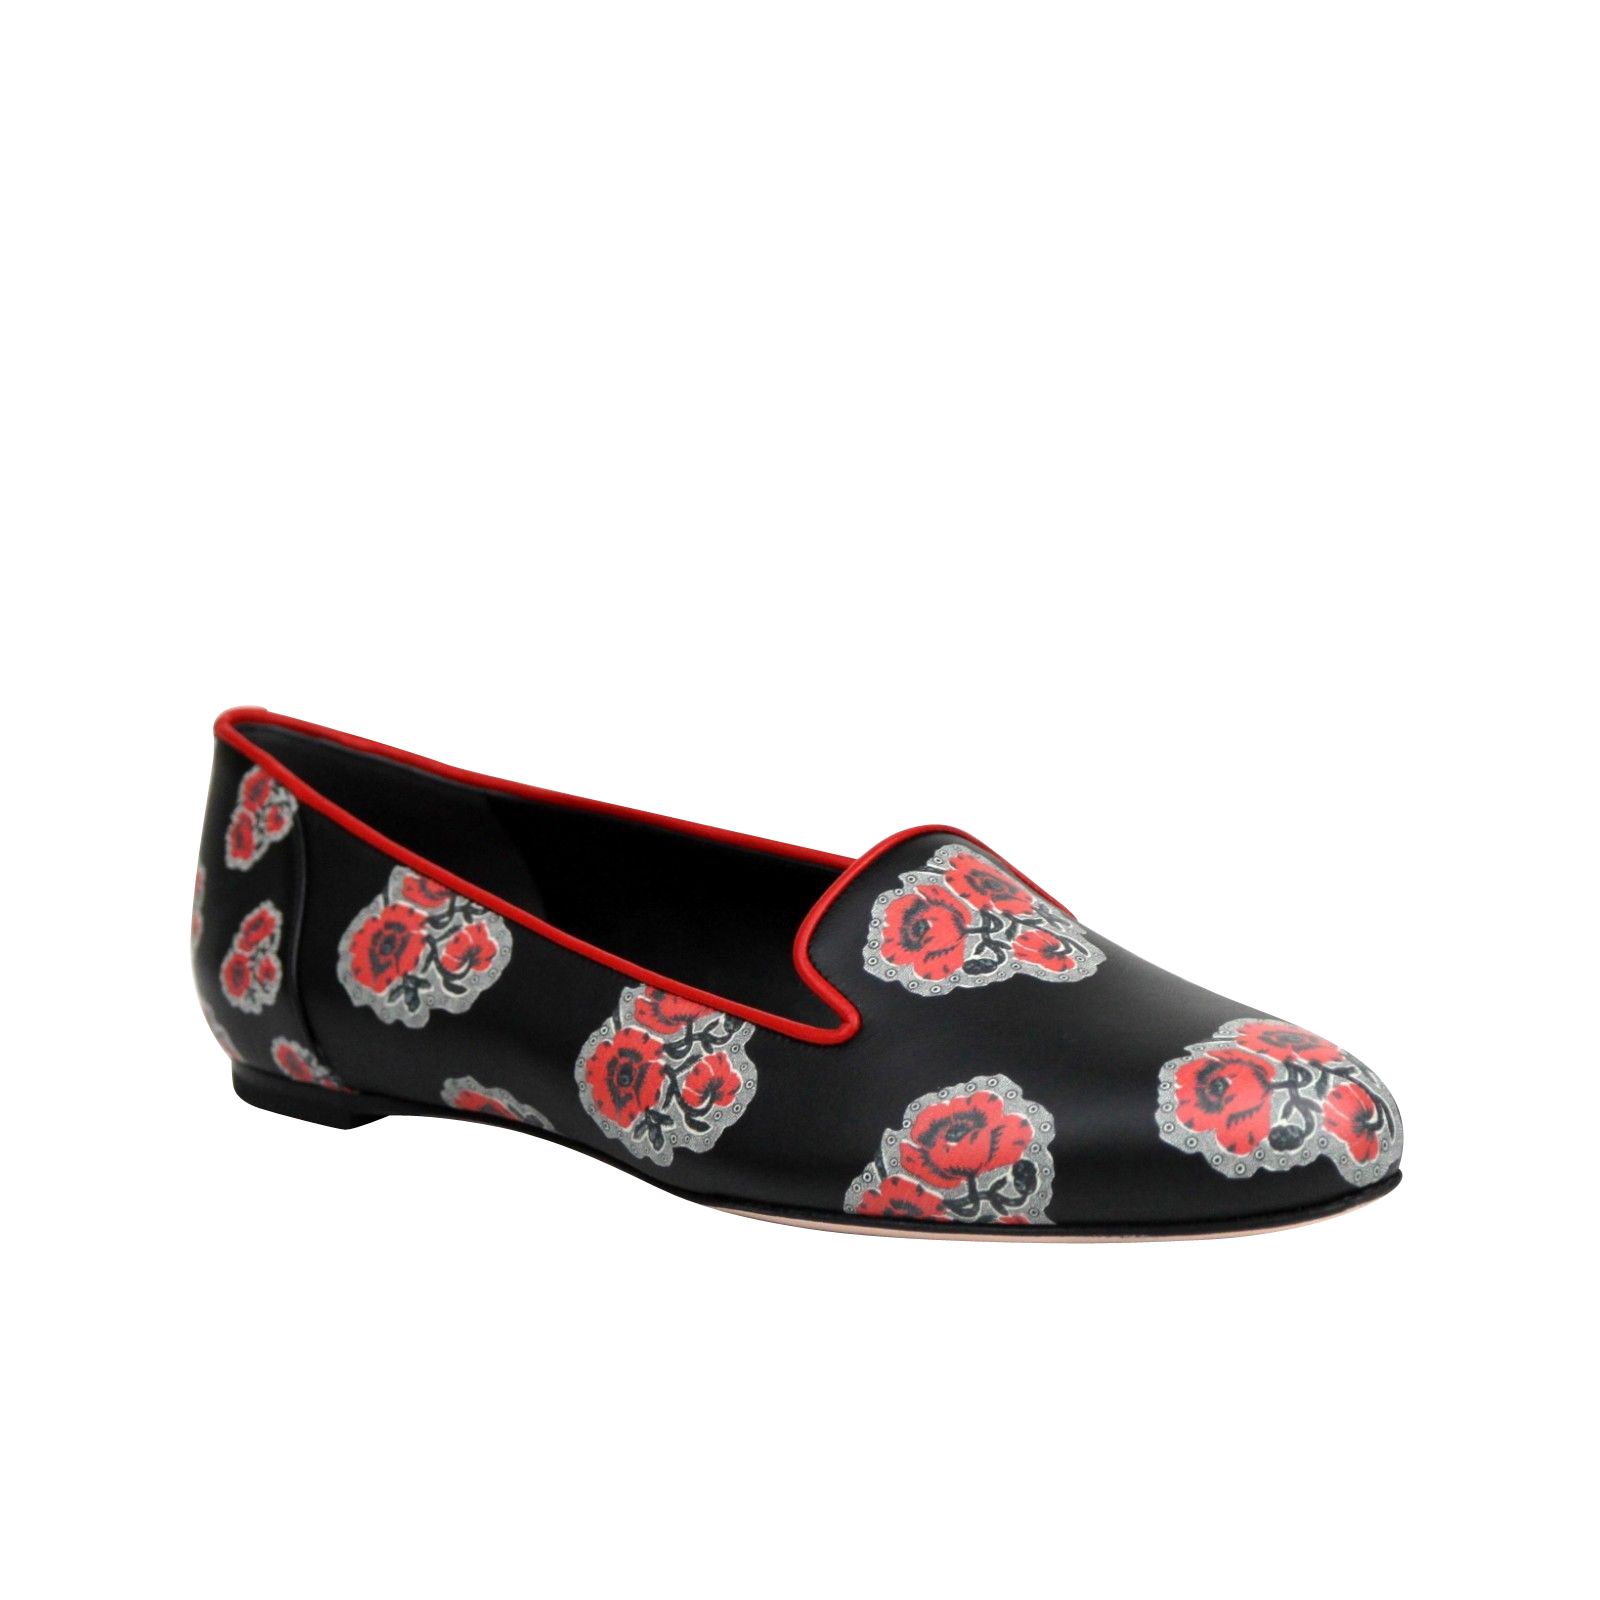 Discover Elegance and Comfort: Alexander McQueen Women’s Rose Pattern Black Leather Slipper Shoes (36 EU / 6 US)